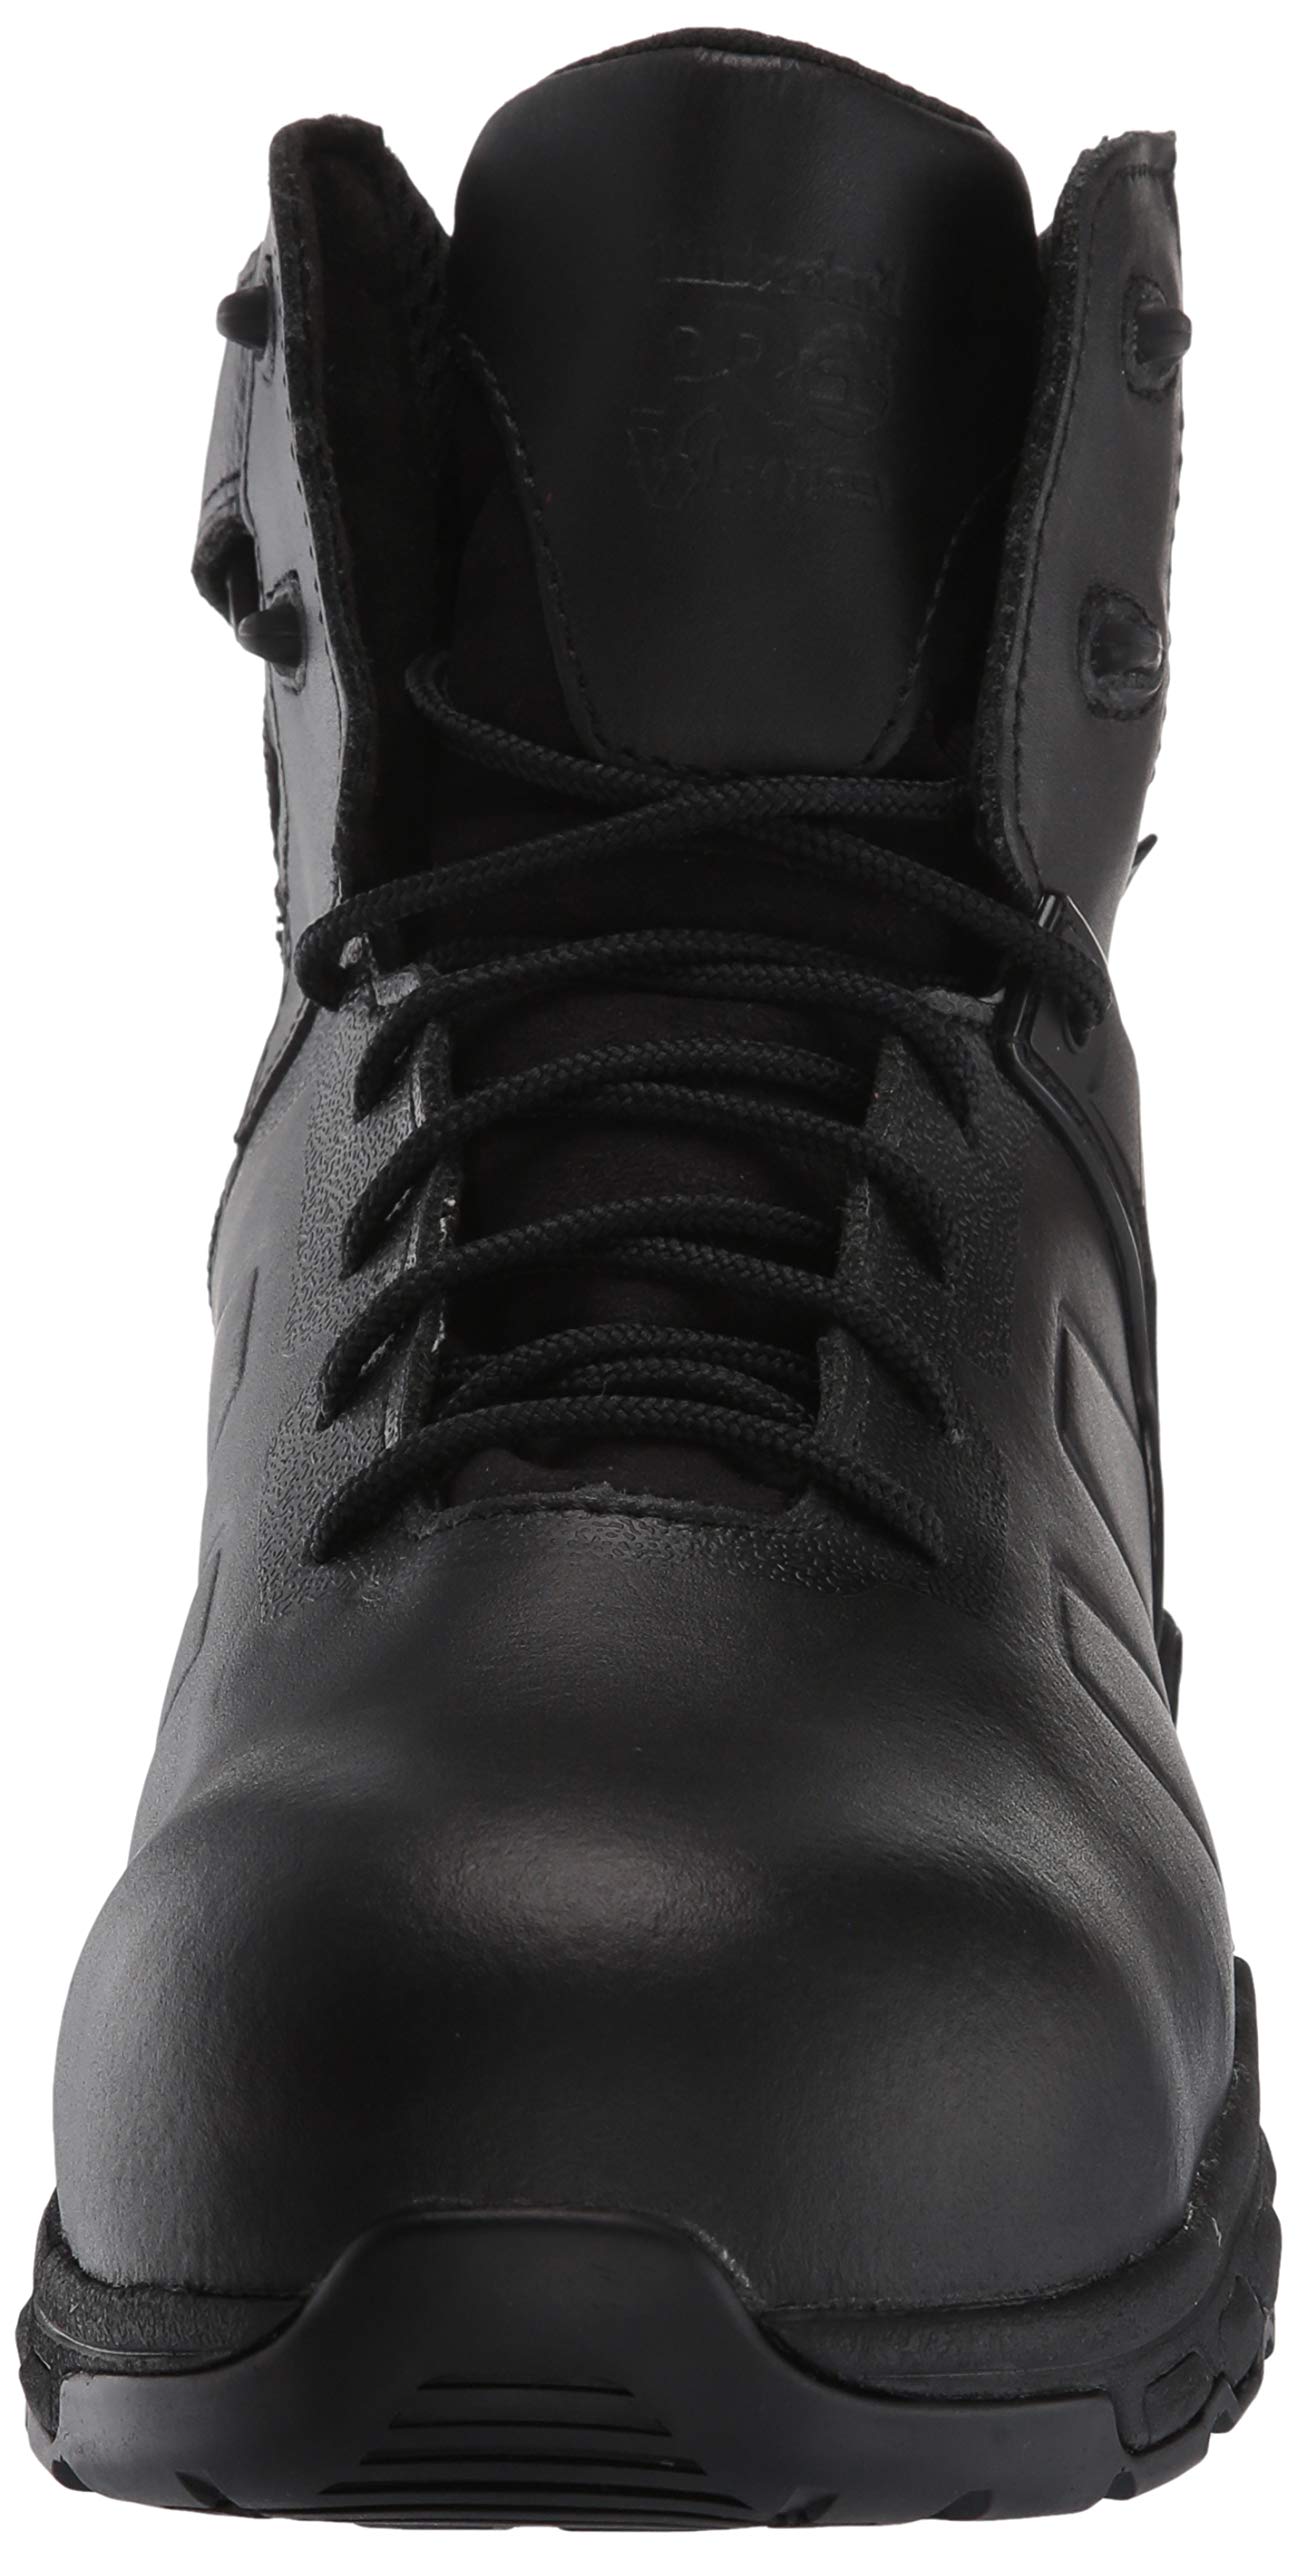 Timberland PRO Men's Hypercharge 6 Inch Composite Safety Toe Puncture Resistant Side-Zip Waterproof Tactical Duty Uniform Work